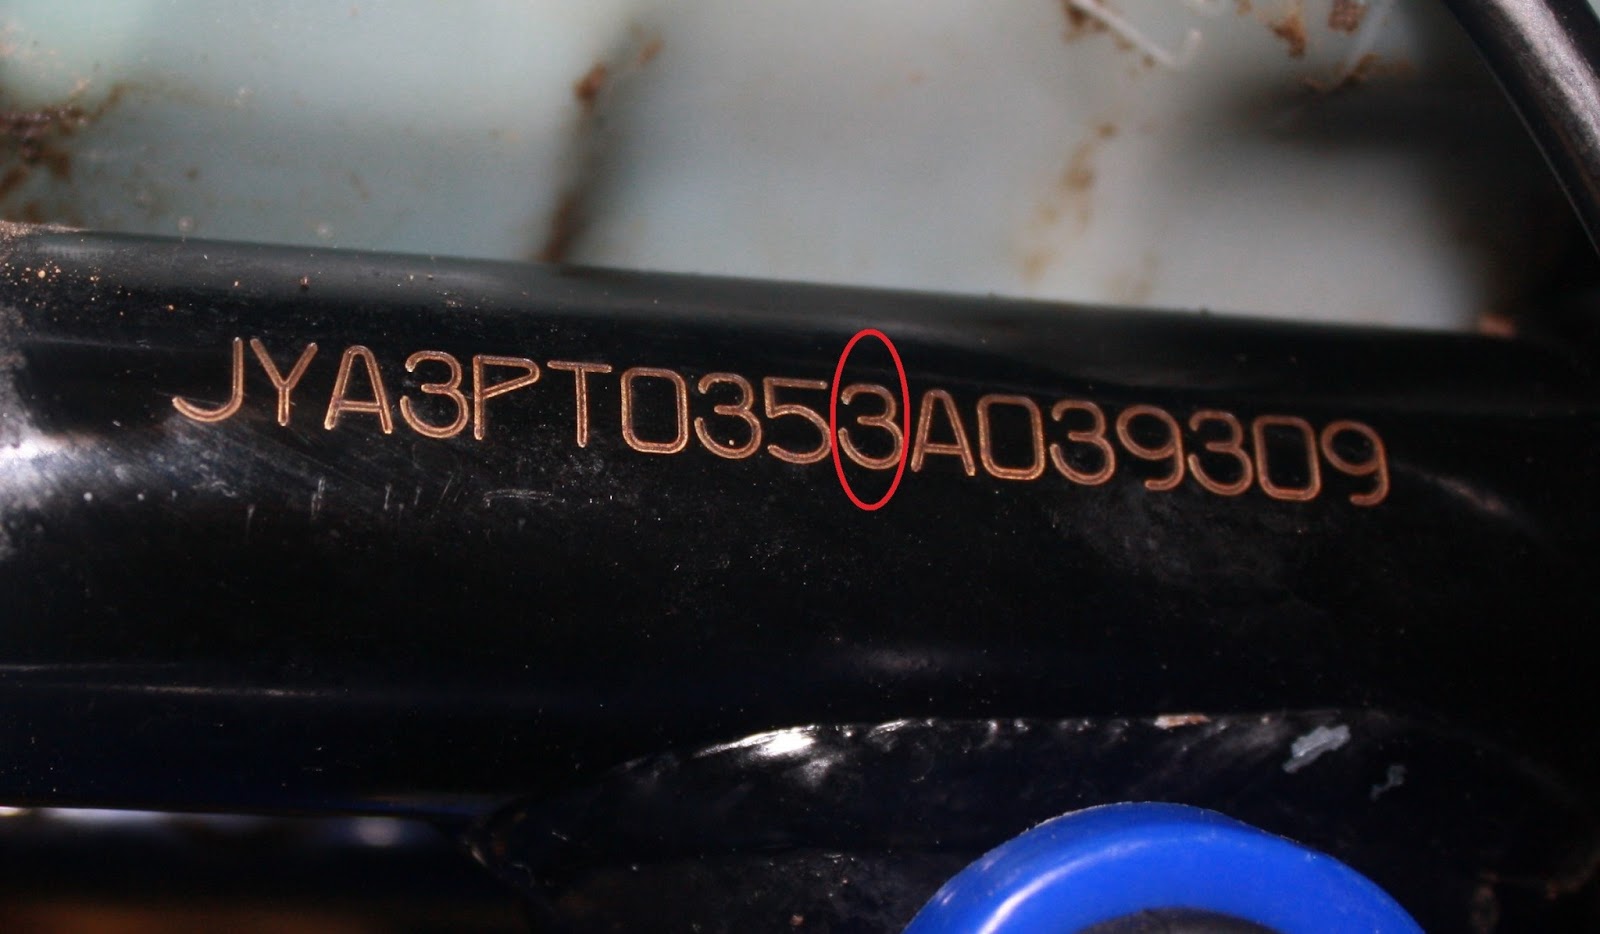 where is the serial number on a dirt bike.